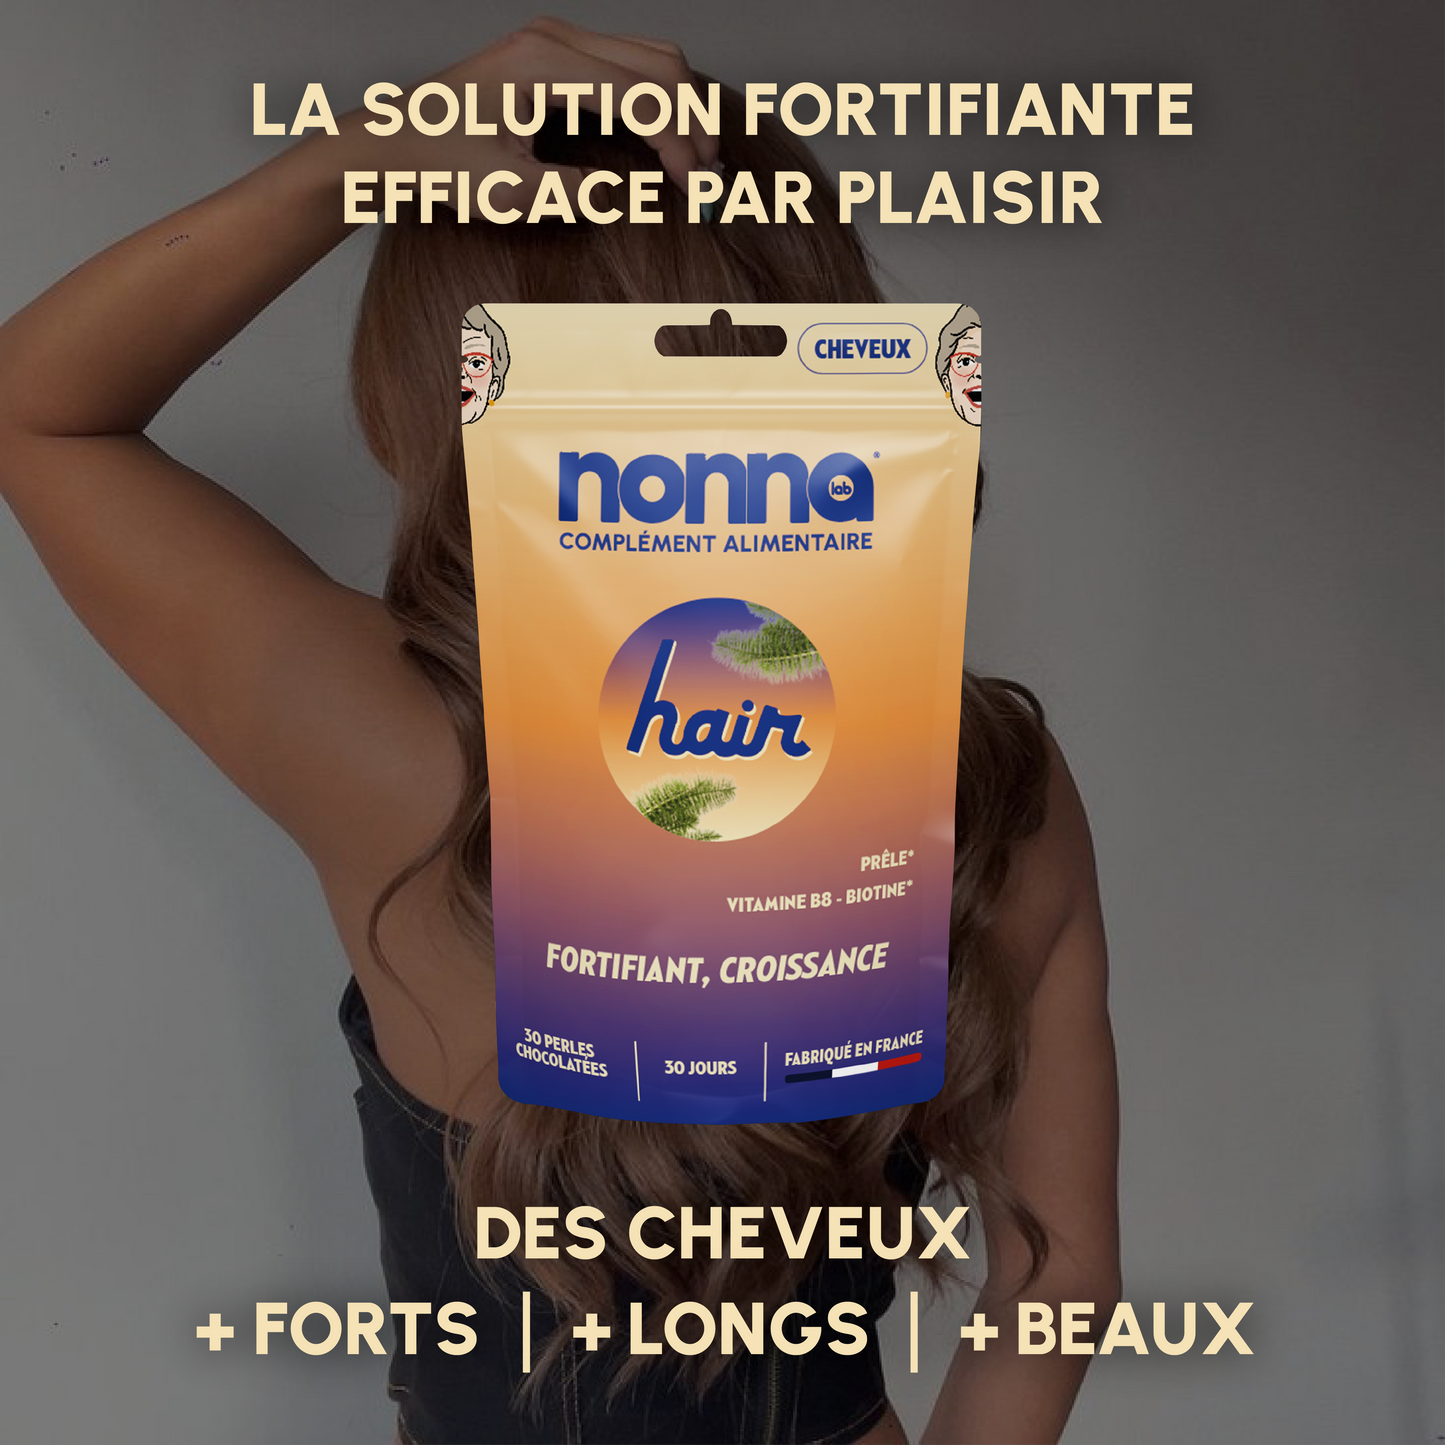 HAIR - Cheveux + forts, + longs, + beaux